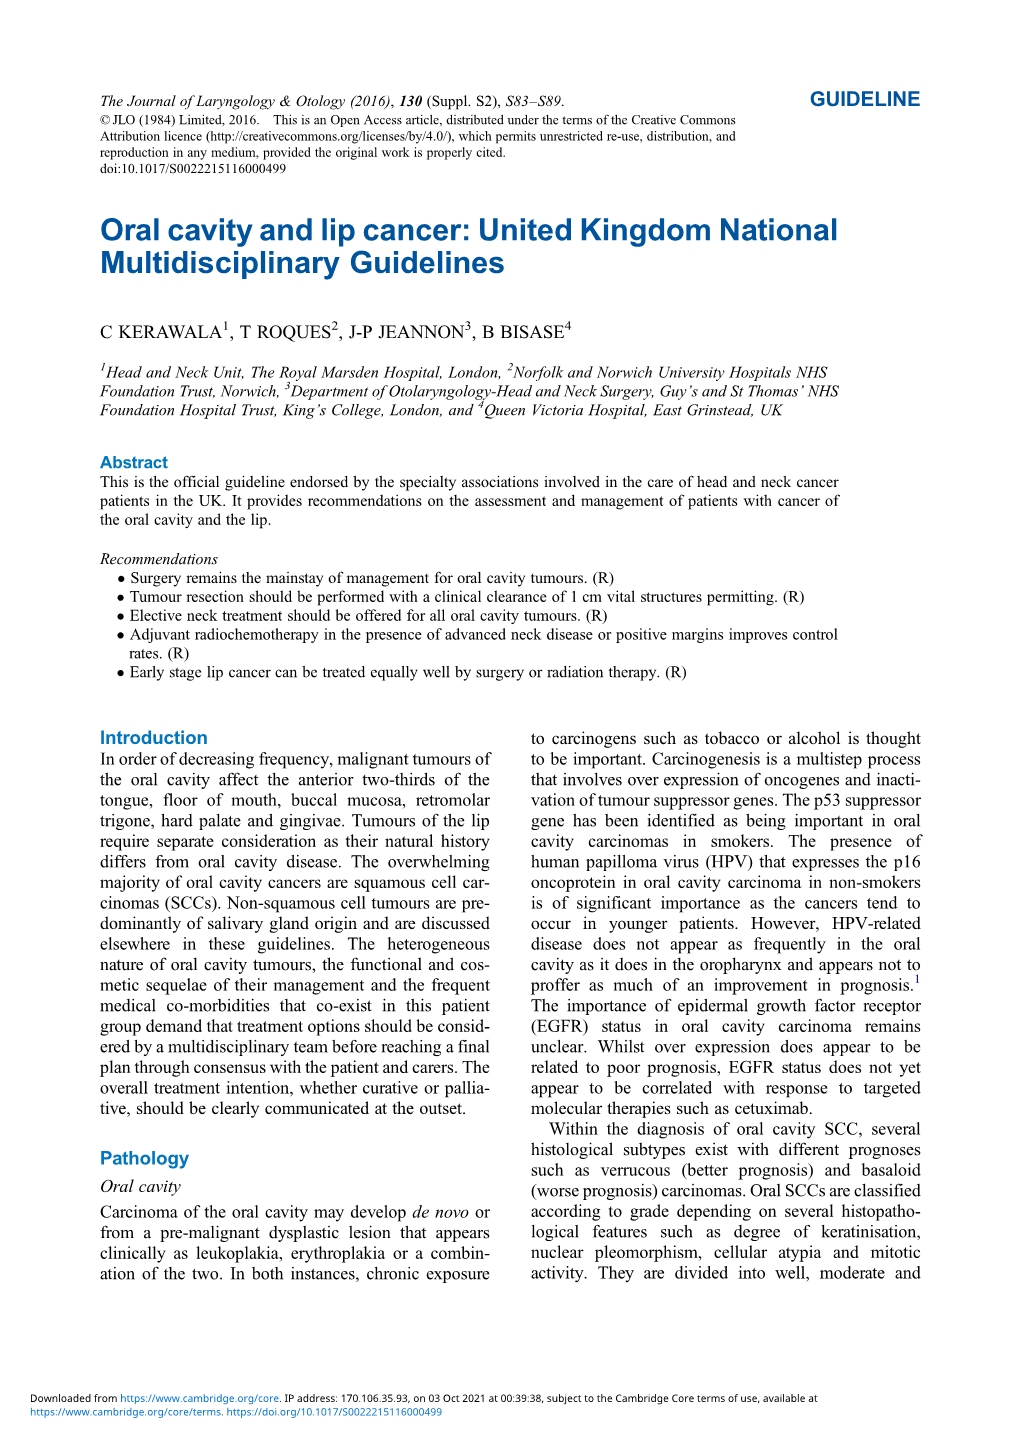 Oral Cavity and Lip Cancer: United Kingdom National Multidisciplinary Guidelines